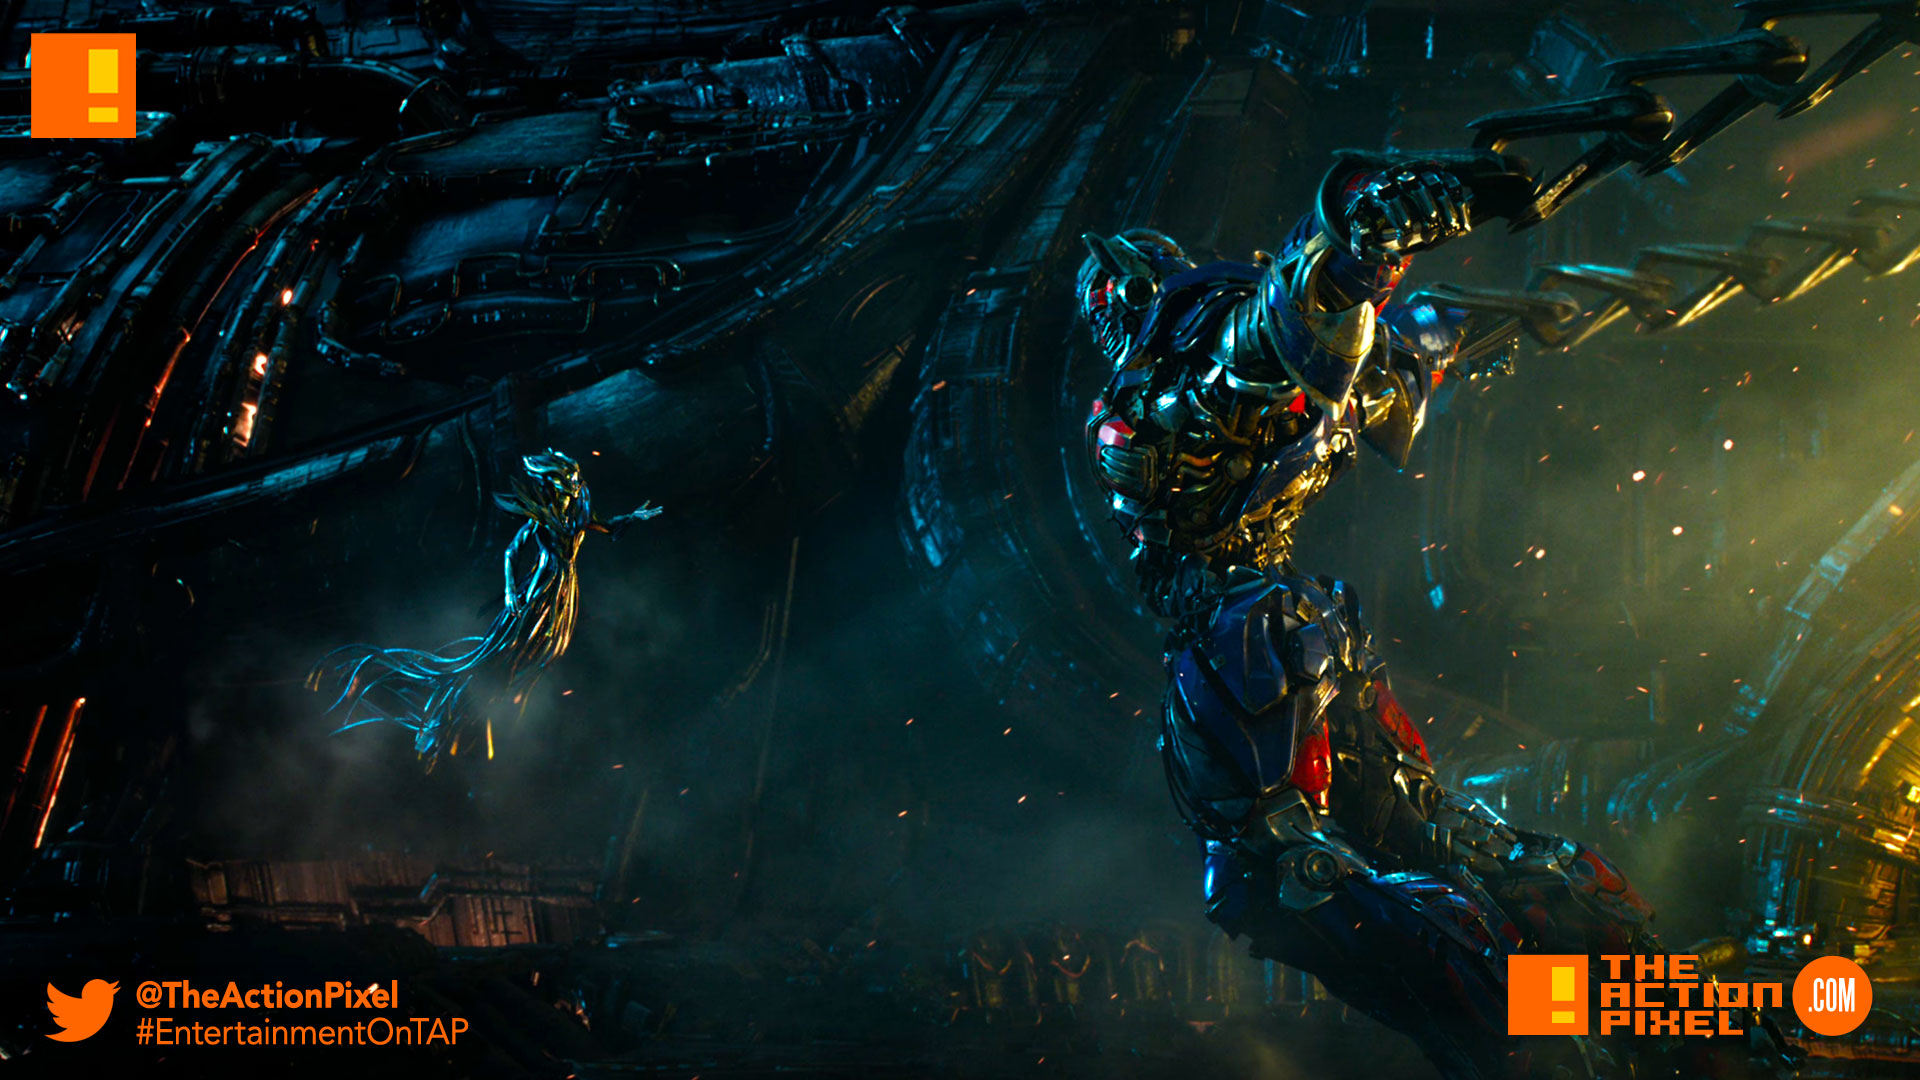 transformers, the last knight, transformers, poster, the last knight, paramount pictures, michael bay, entertainment on tap, the action pixel, trailer,